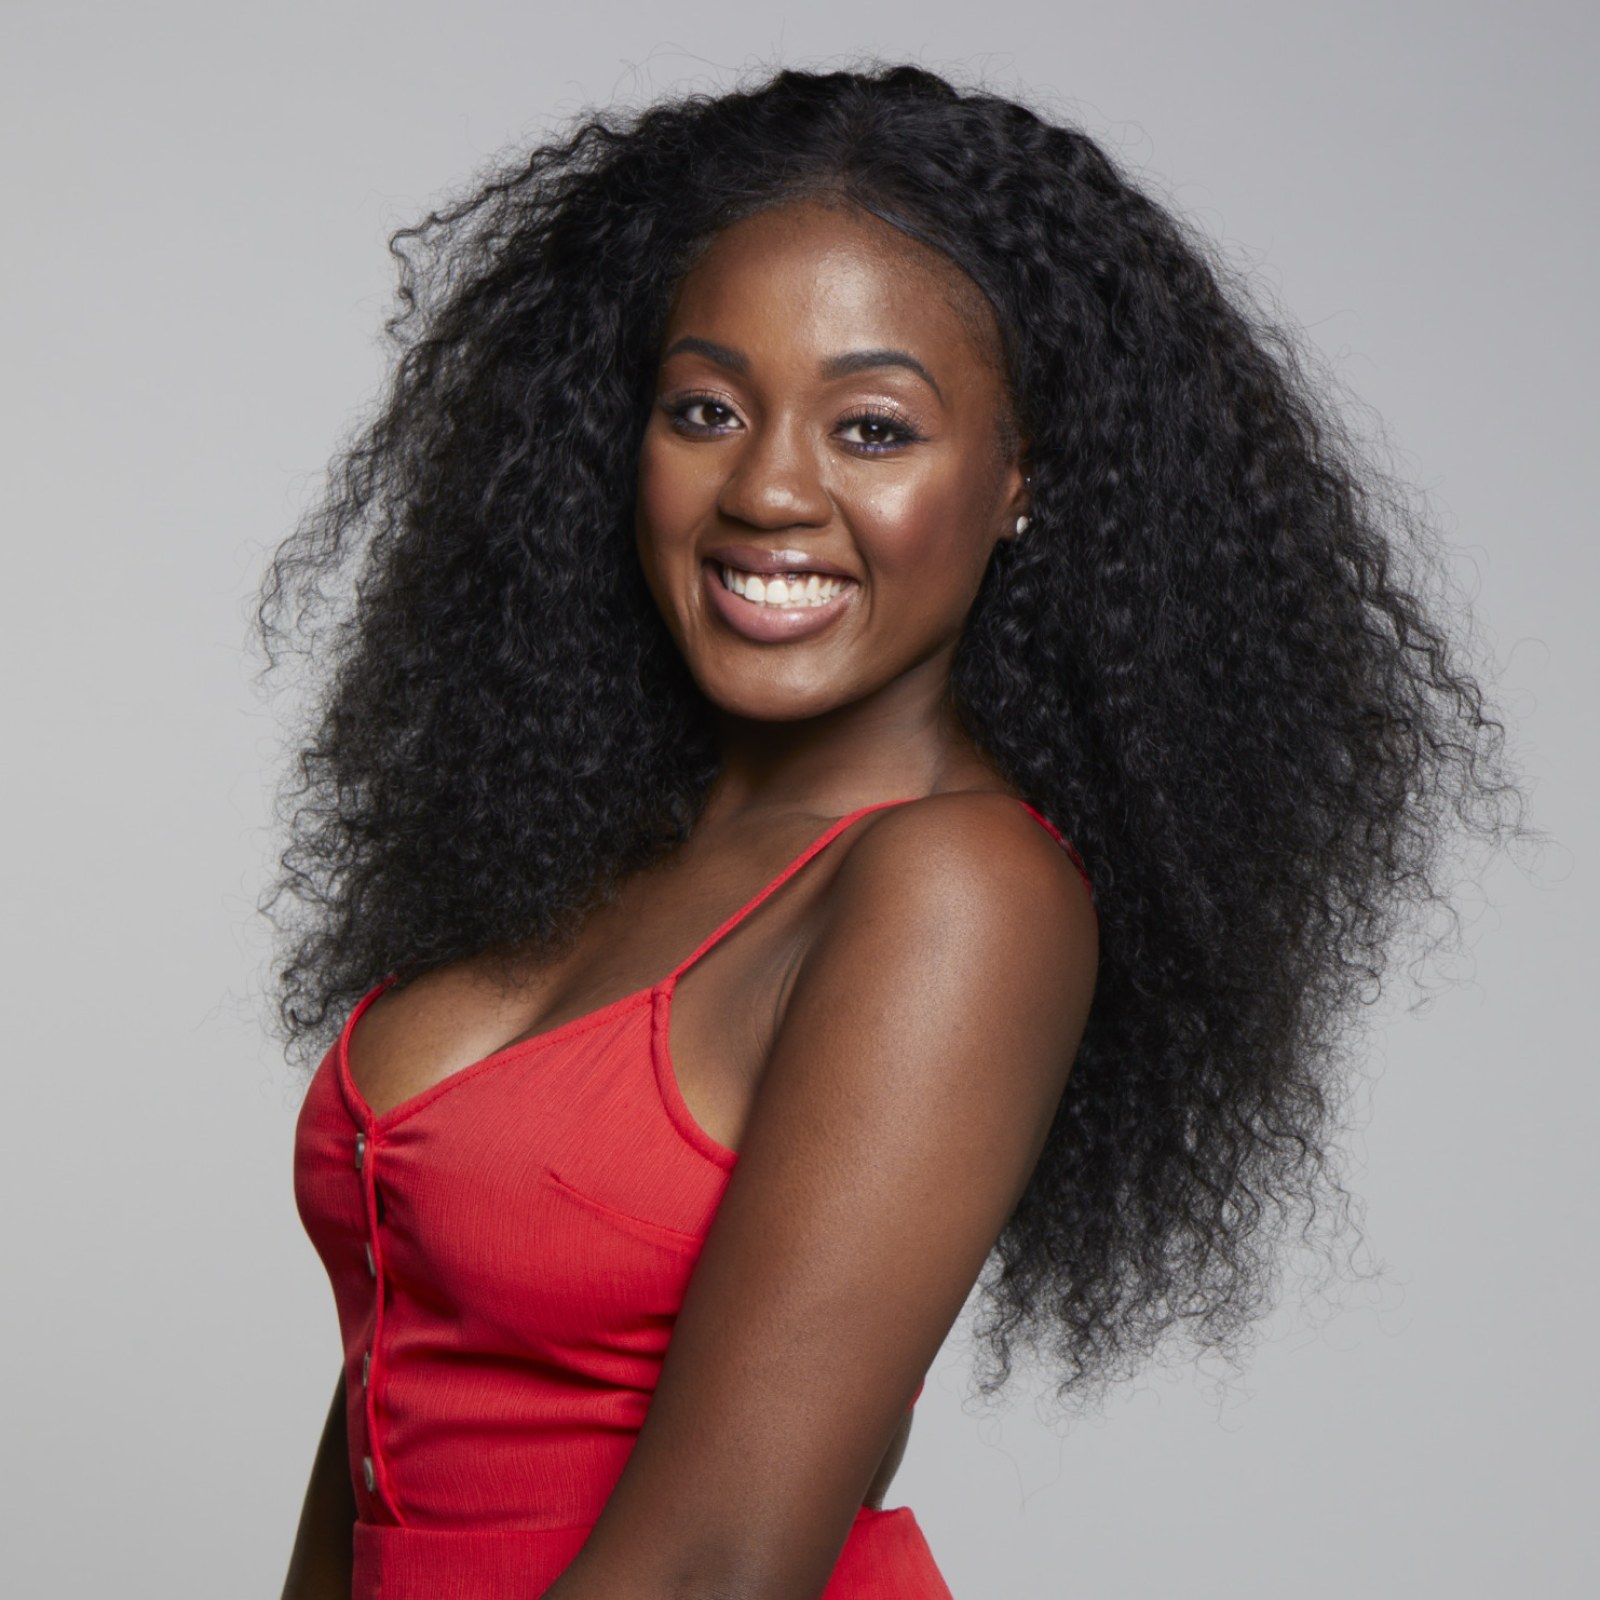 Why Kemi Fakunle Is Horrified About Big Brother Season 21